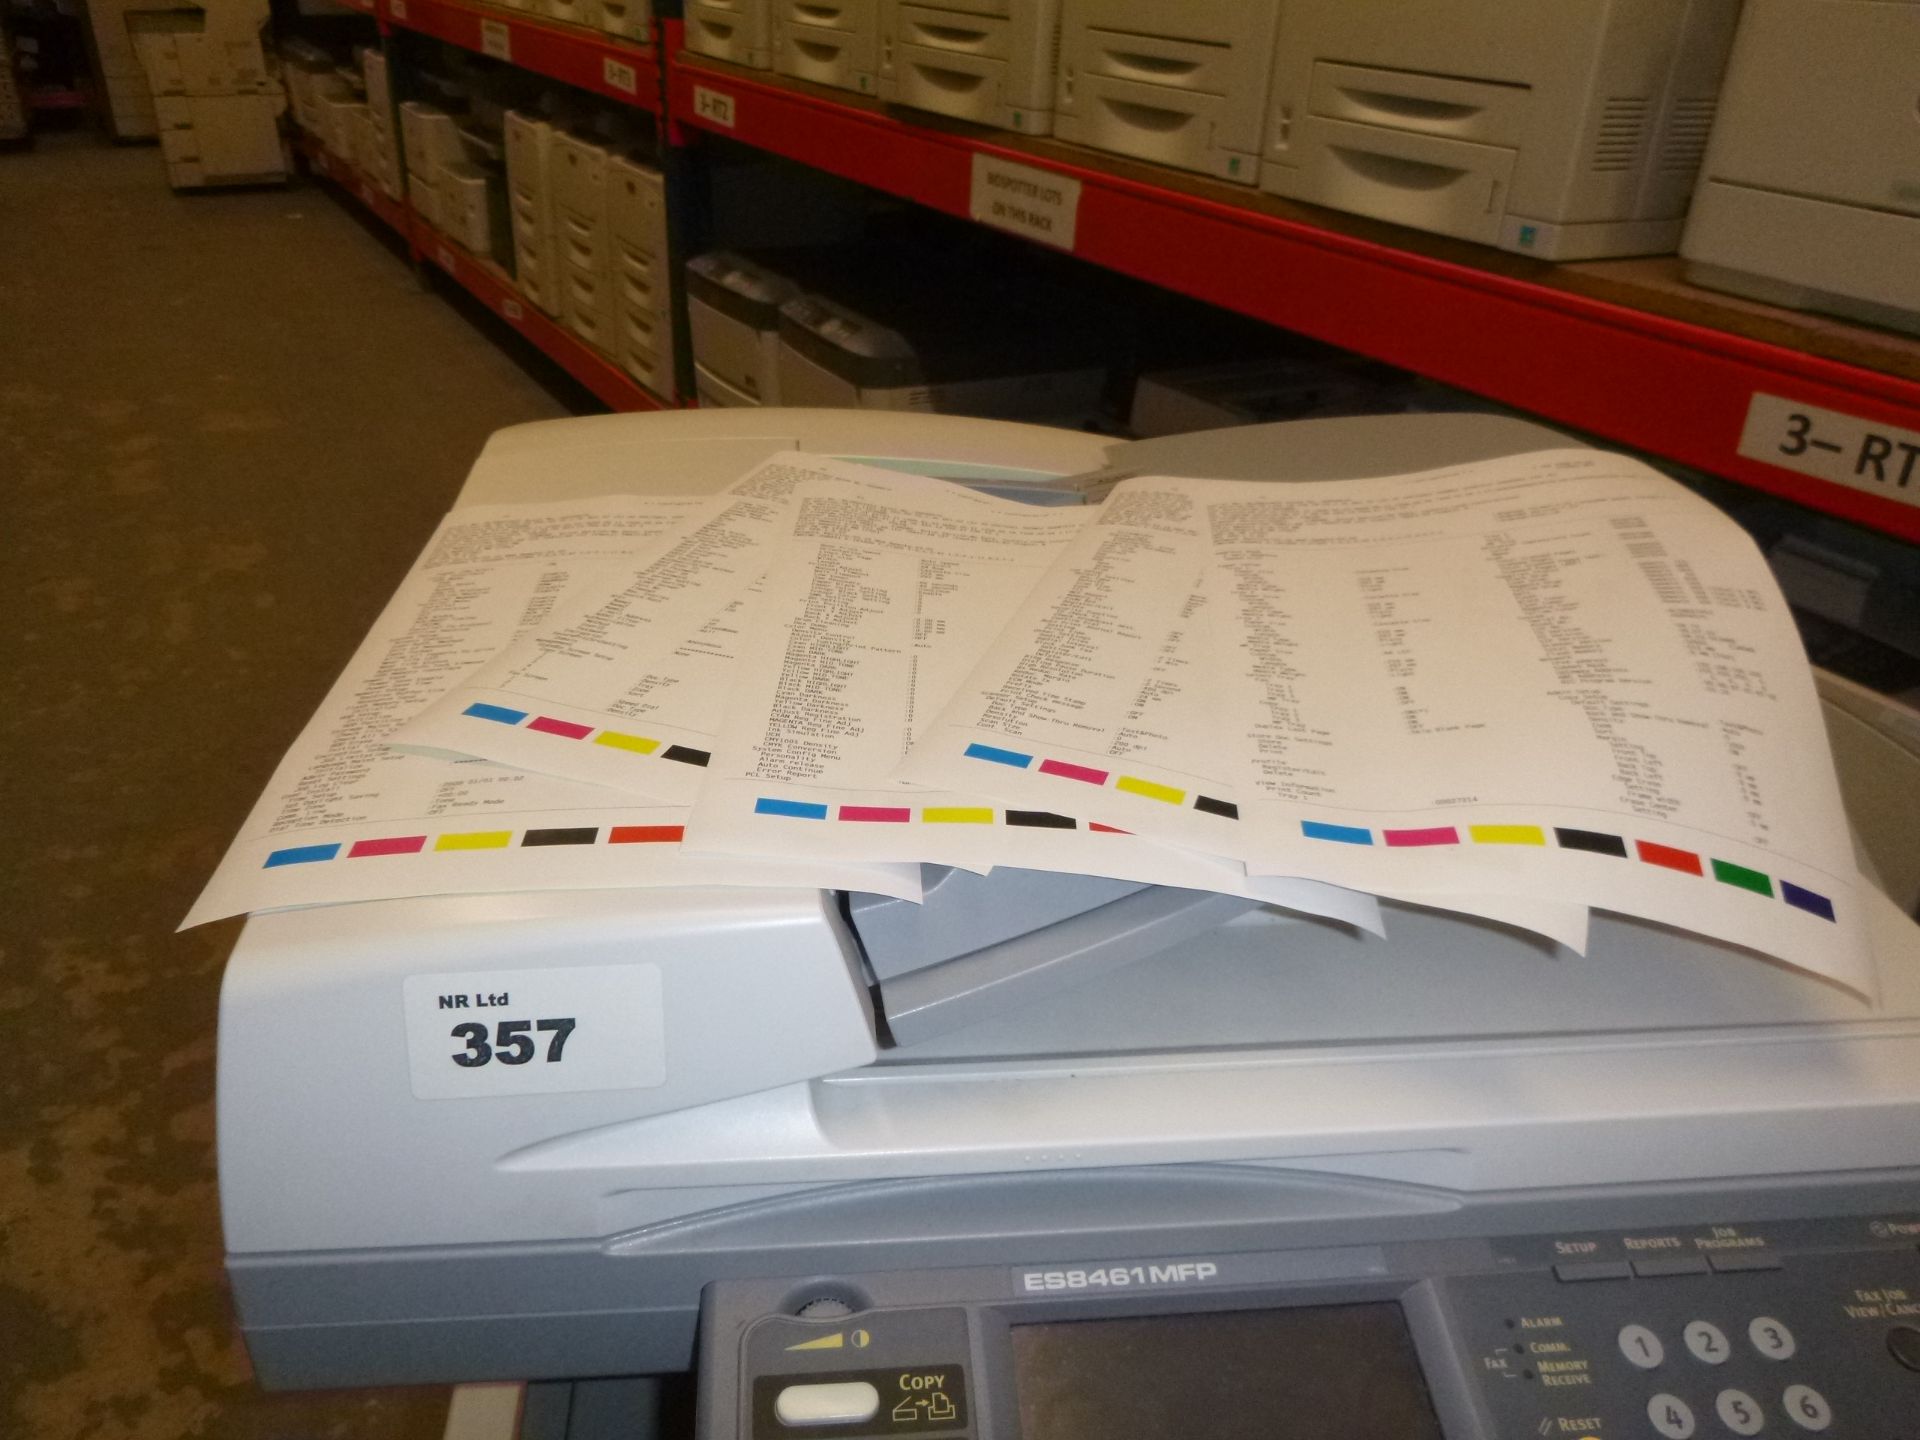 OKI ES8461 MFP COLOUR LASER PRINTER. ON WHEELS WITH 3 PAPER TRAYS, TEST PRINT & COPY. - Image 2 of 2